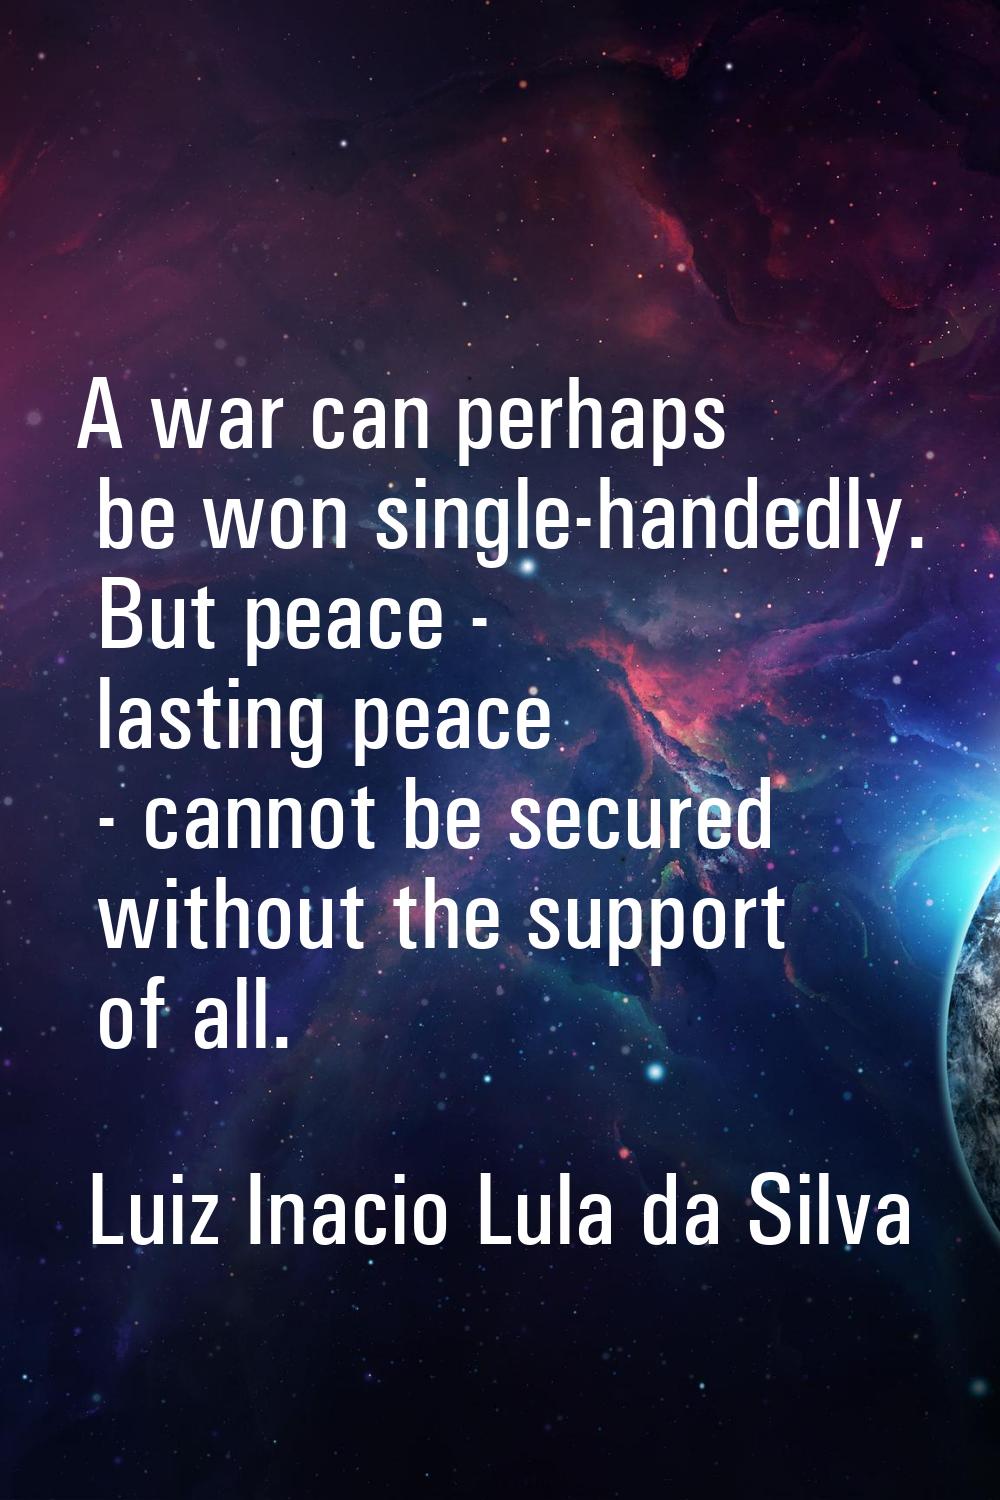 A war can perhaps be won single-handedly. But peace - lasting peace - cannot be secured without the